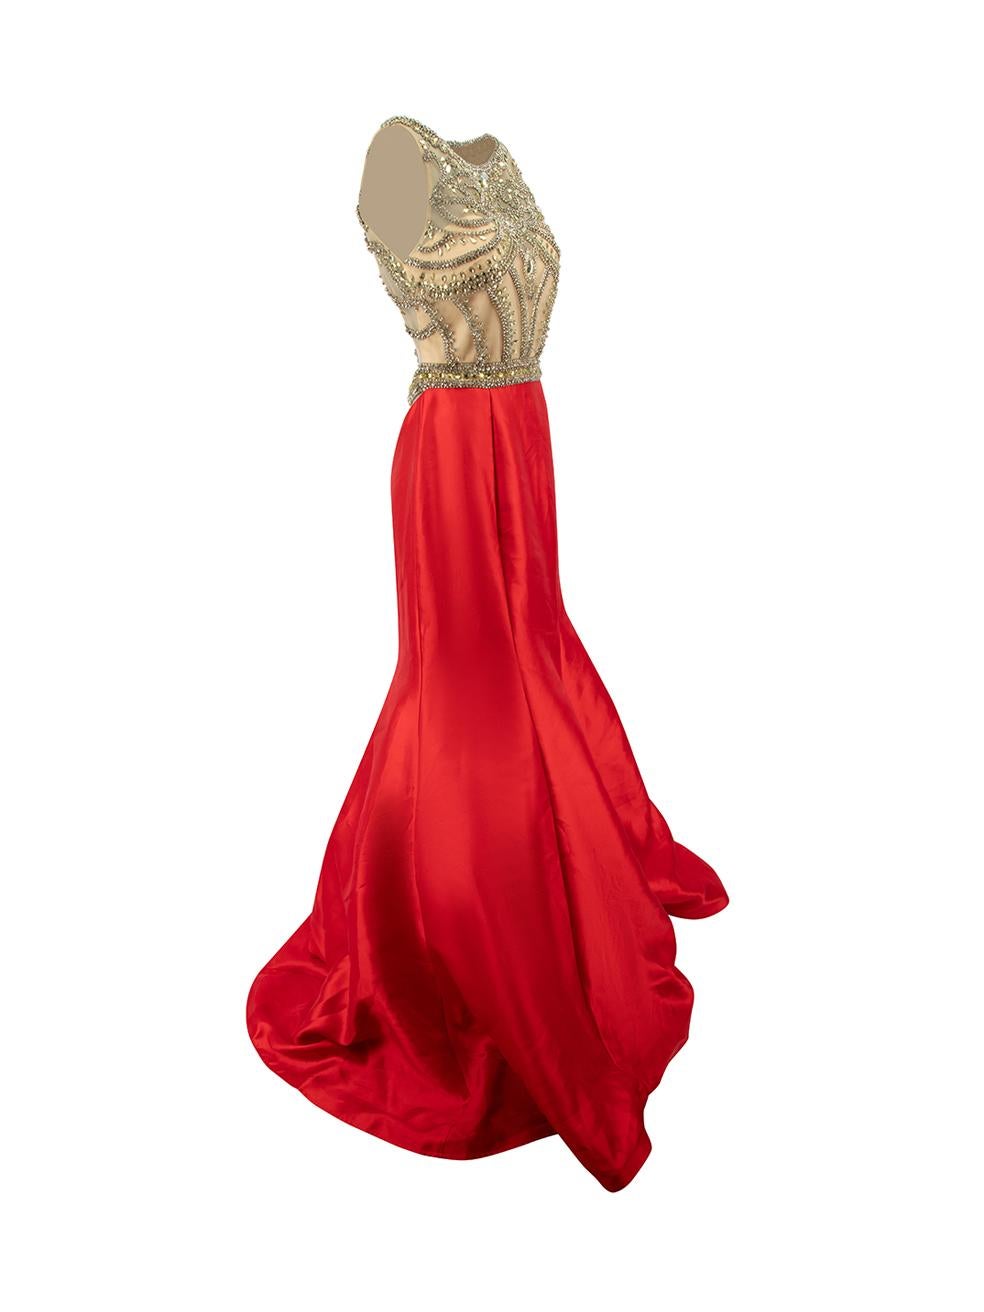 CONDITION is Very good. Hardly any visible wear to dress is evident on this used Jovani designer resale item.
  
Details
Red
Polyester
Gown
Sleeveless
Round neck
Open back
Embellished sheer bodice
Back hook fastening
Layered net puffy maxi